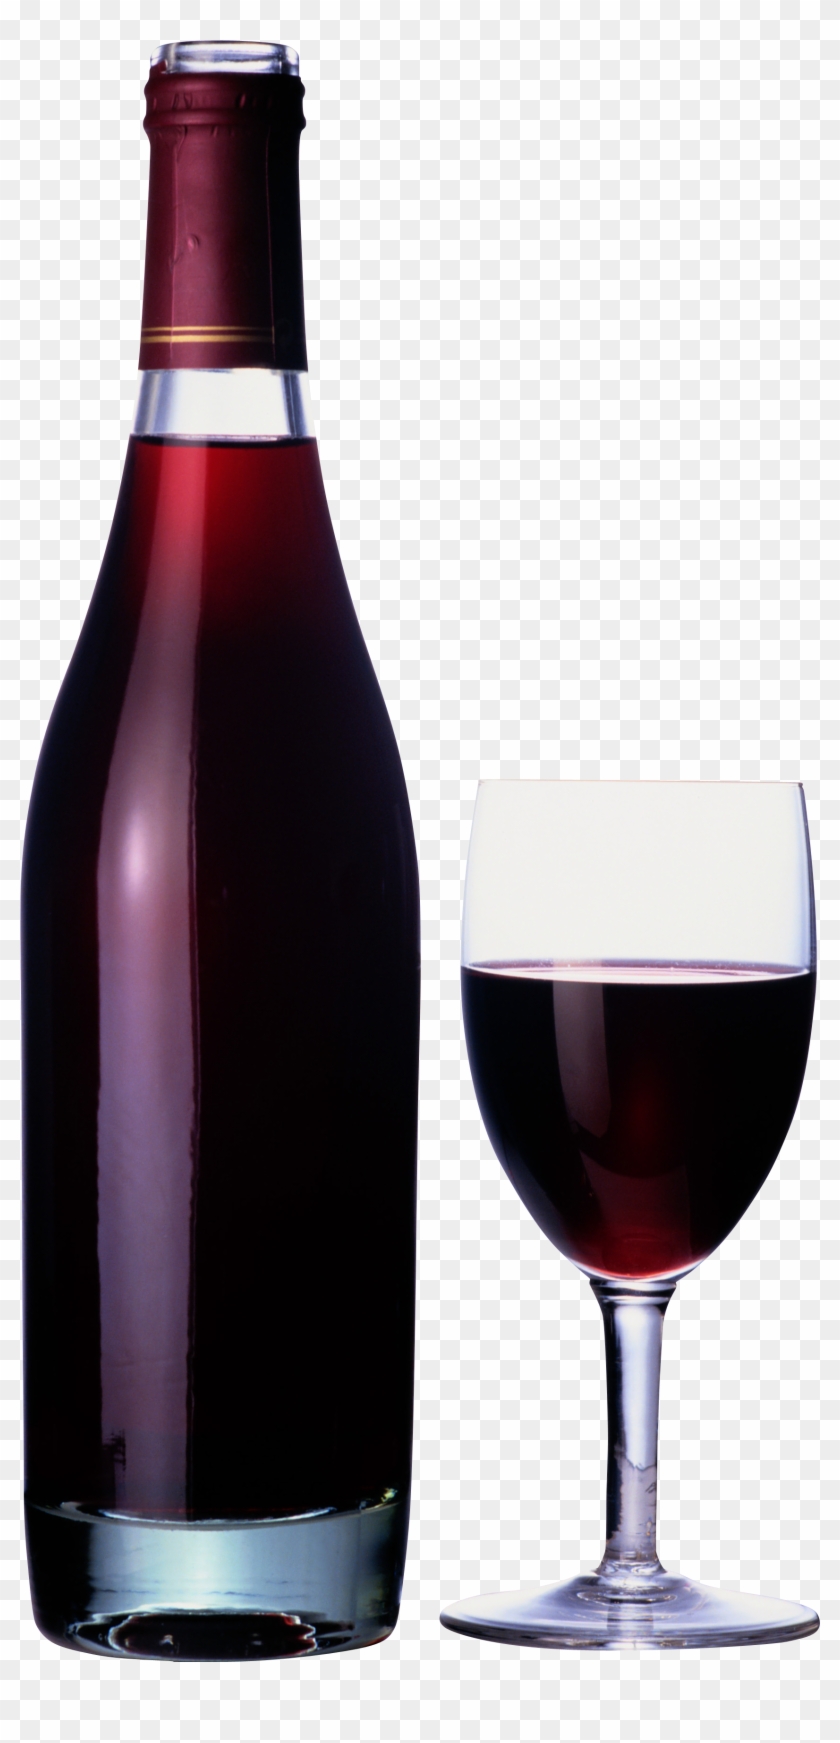 Wine Bottle Png Clipart - Wine Bottle And Glass Png #206781